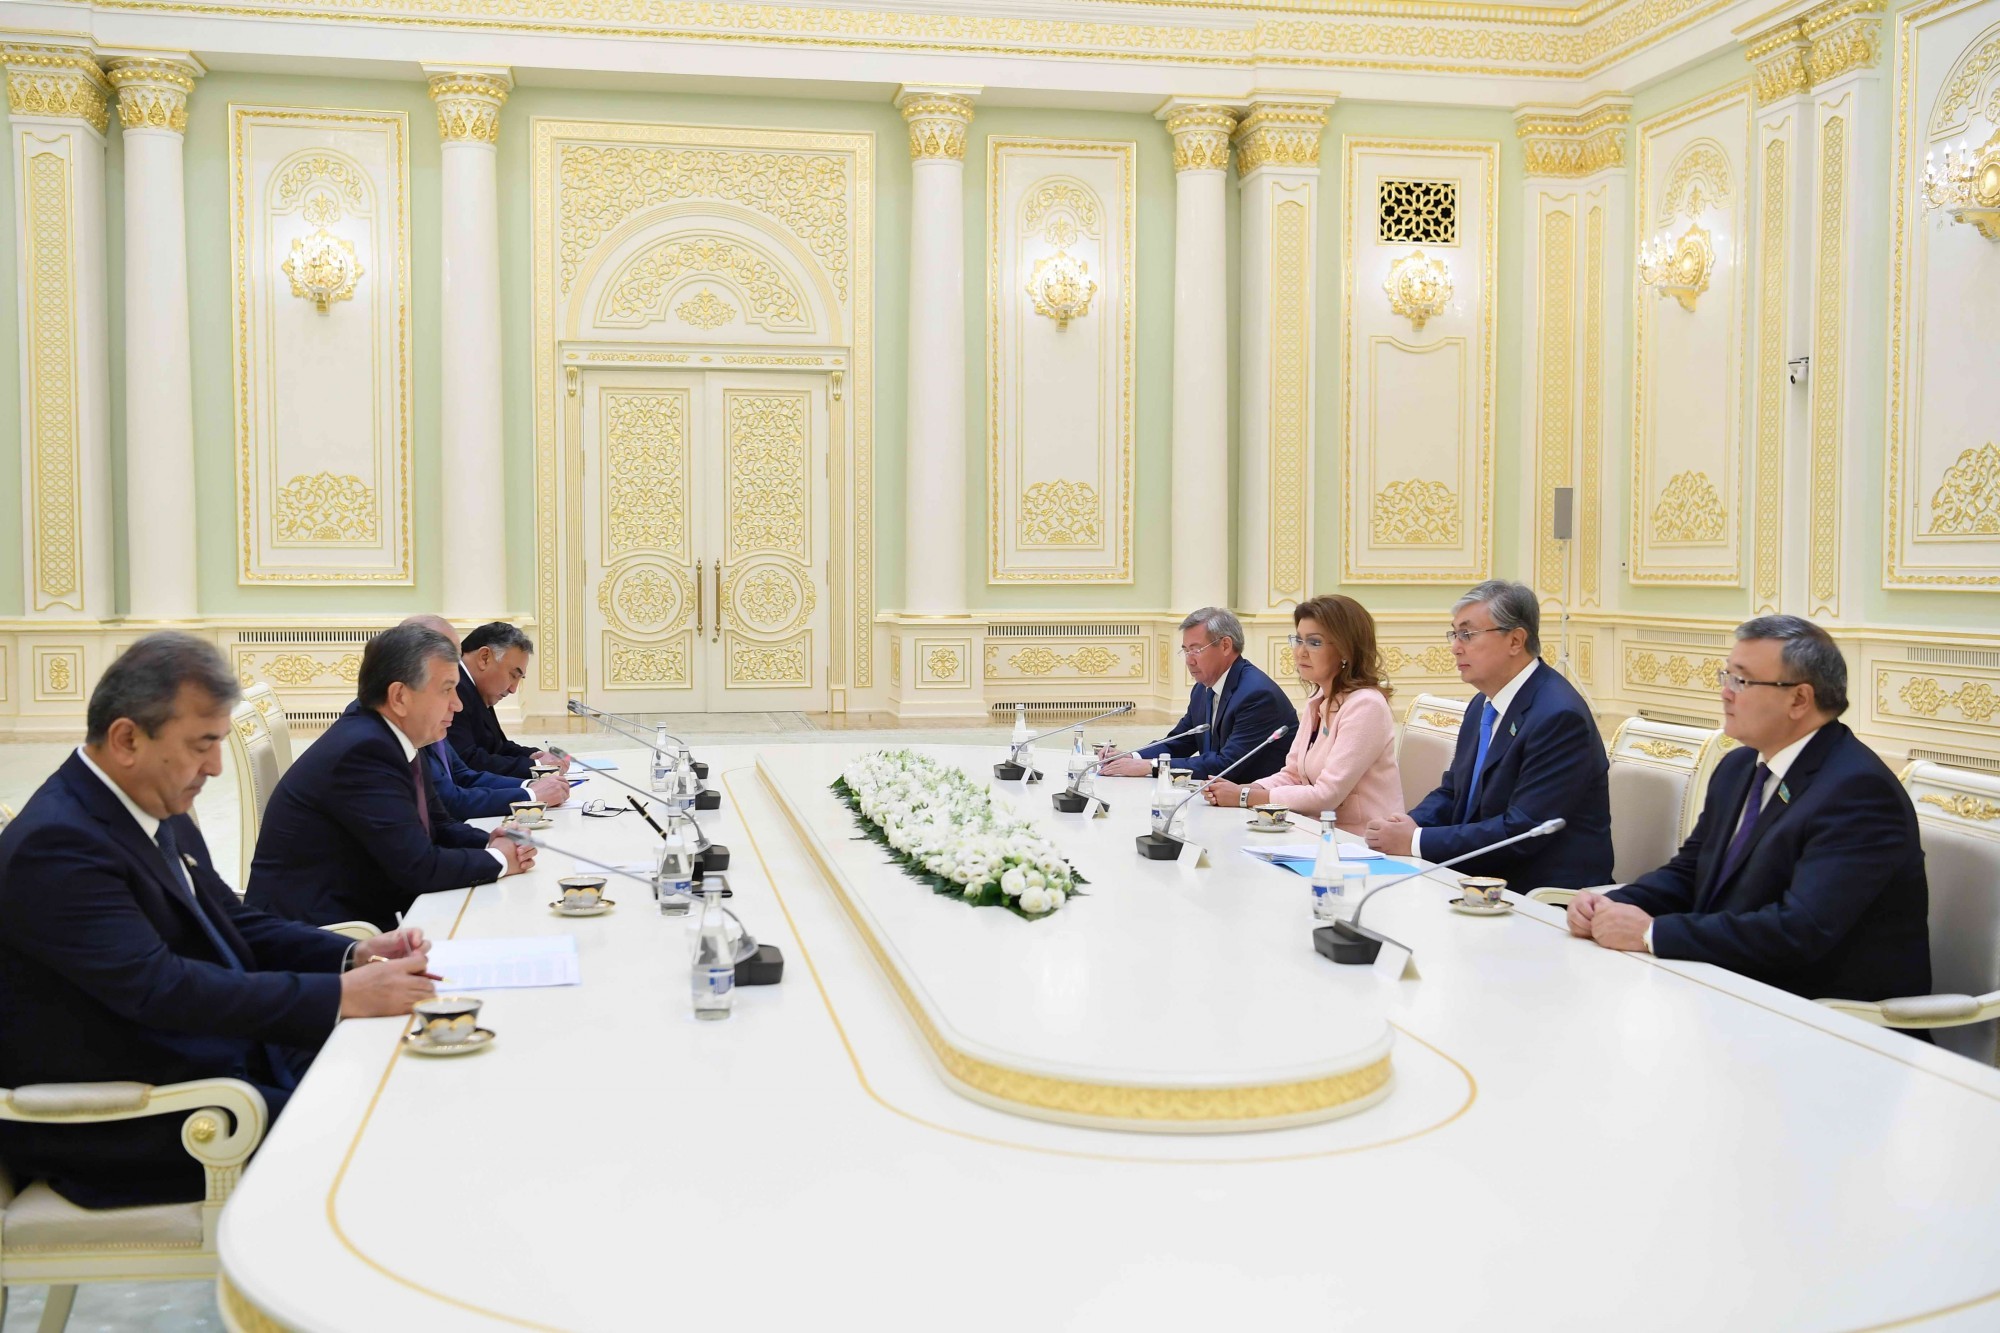 An agreement to intensify inter-parliamentary contacts with Uzbekistan was reached